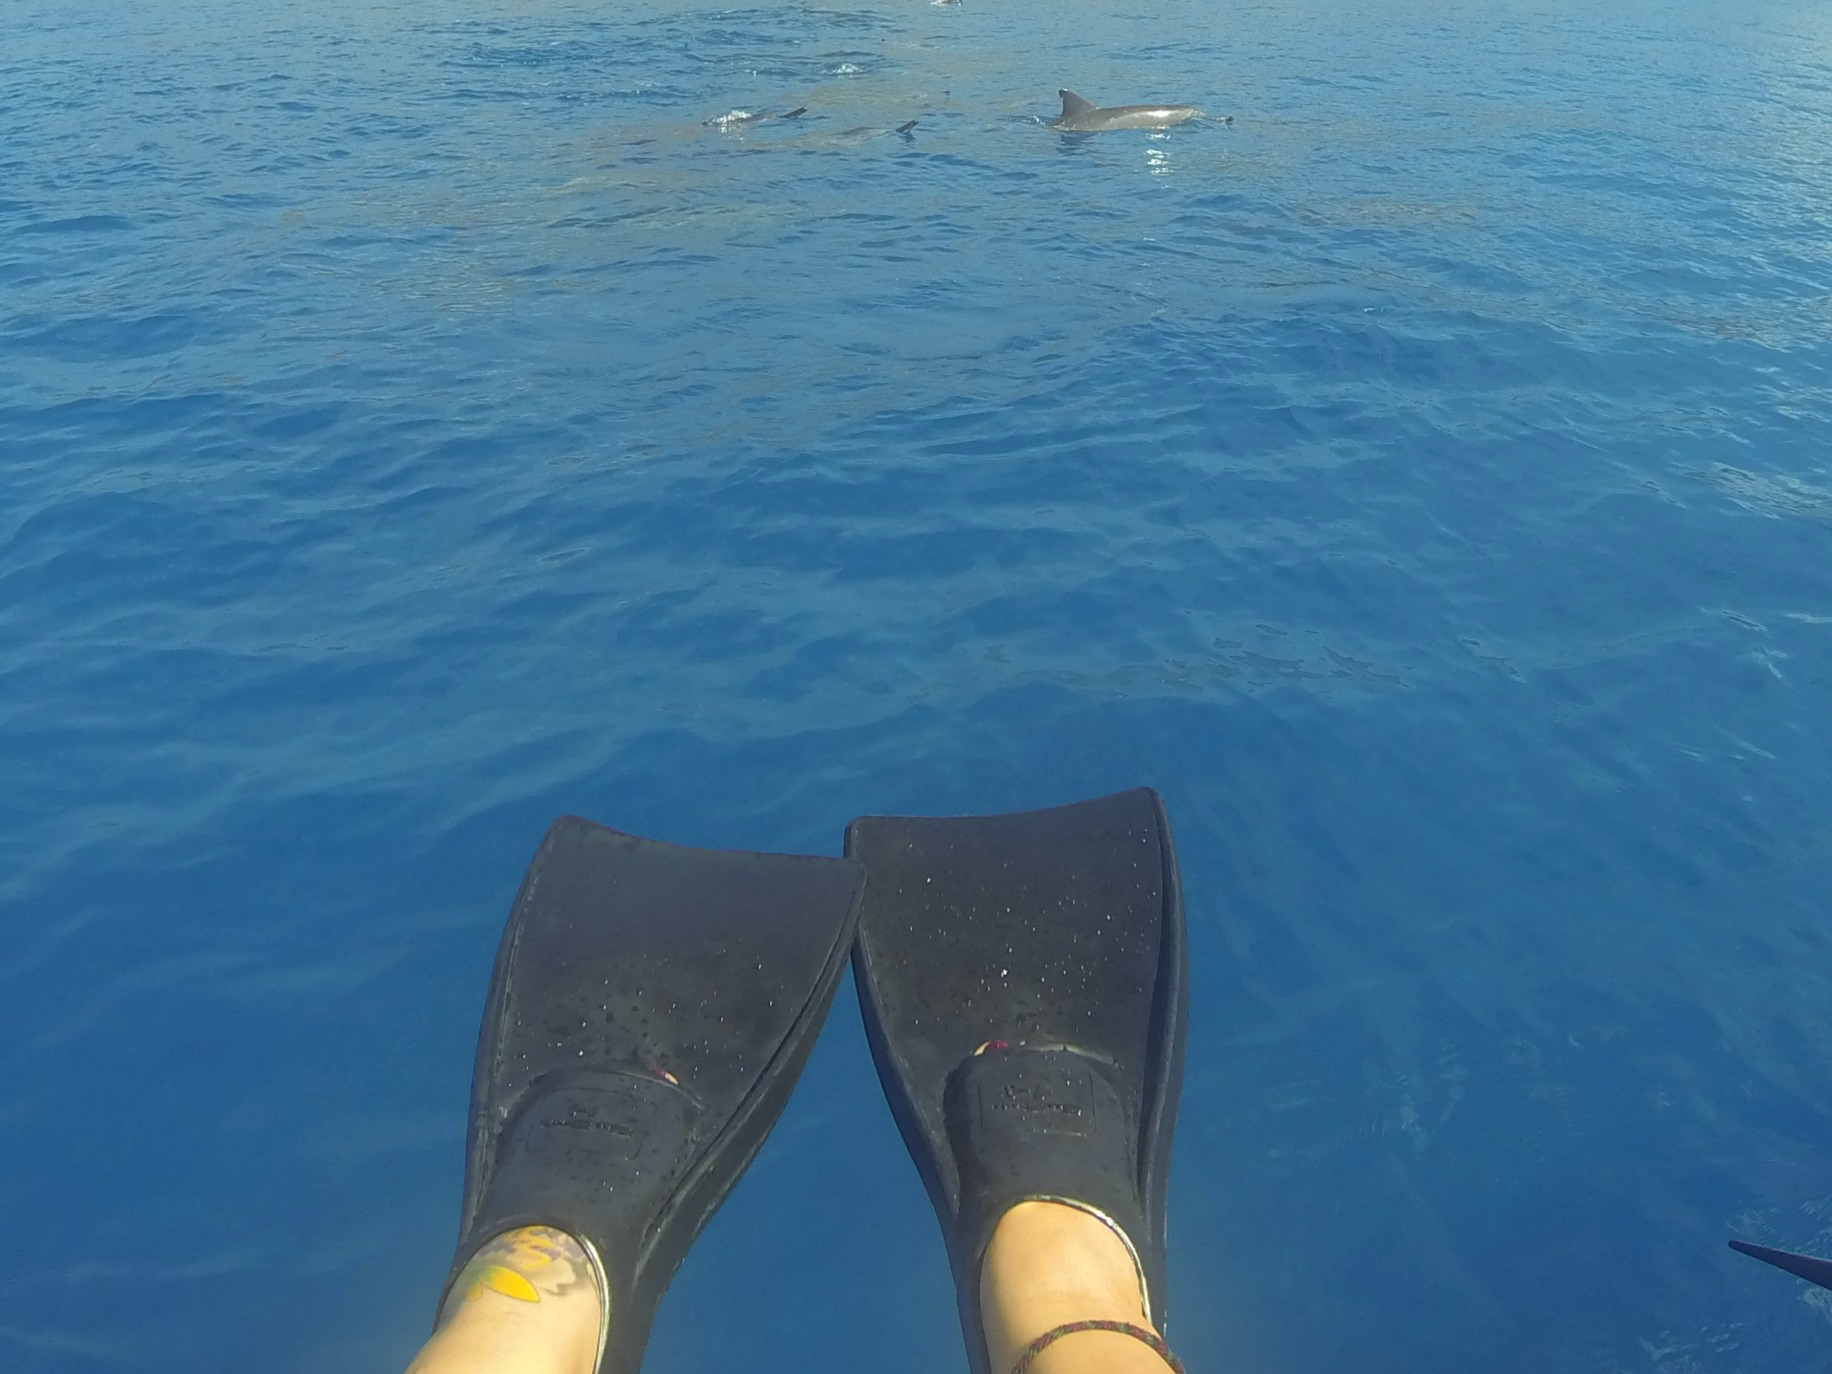 dolphin excursion Hawaii. Swim with dolphins hawaii